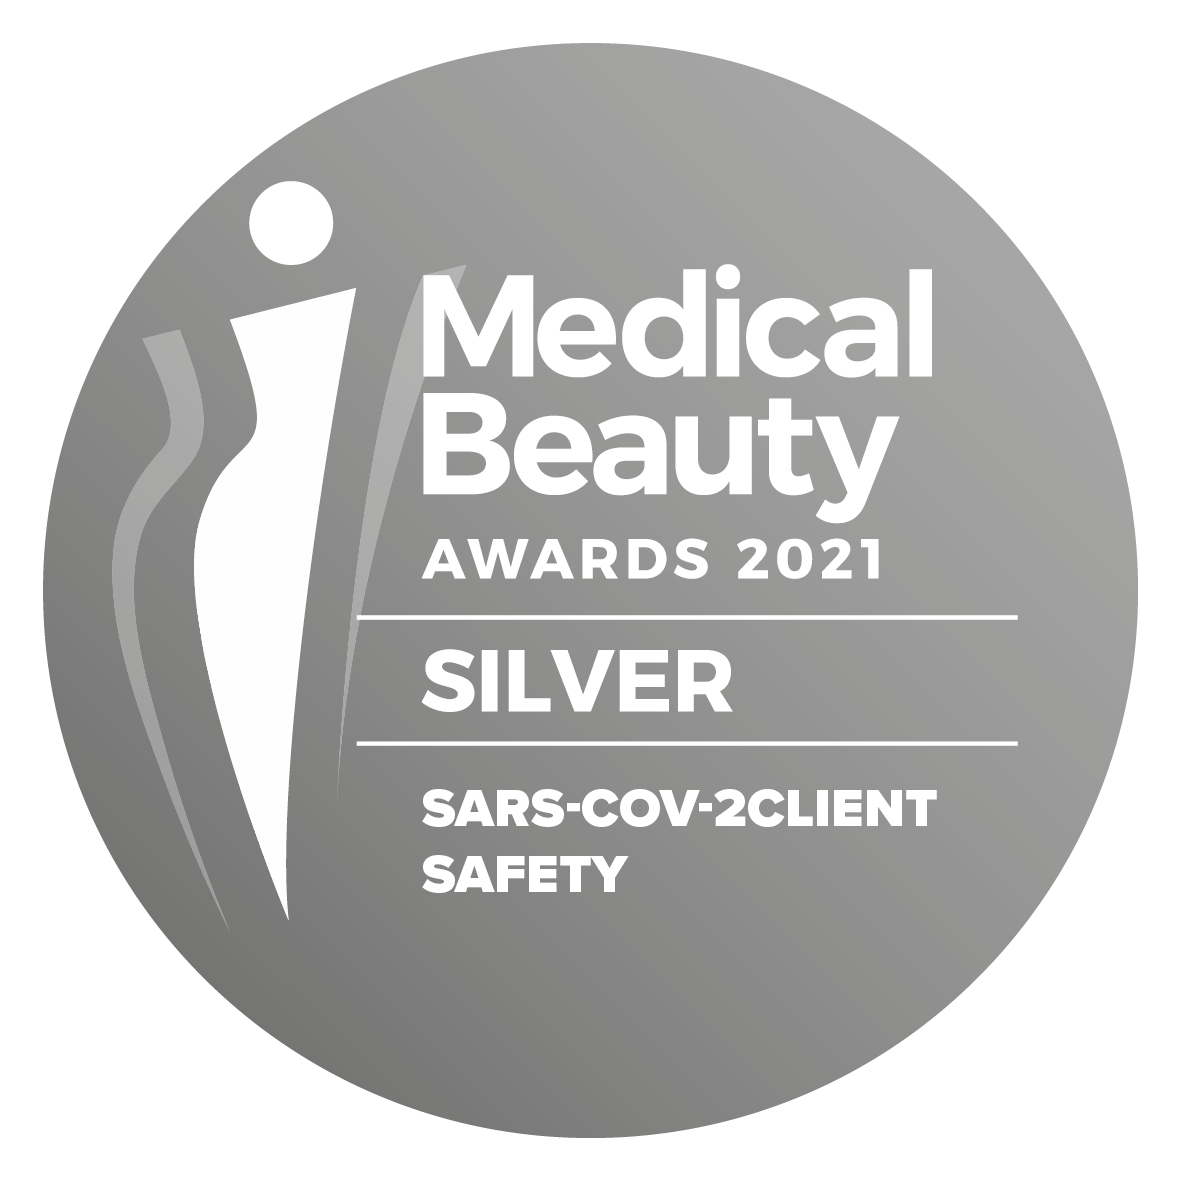 Medical Beauty Awards_2021_SARS-CoV-2client safety